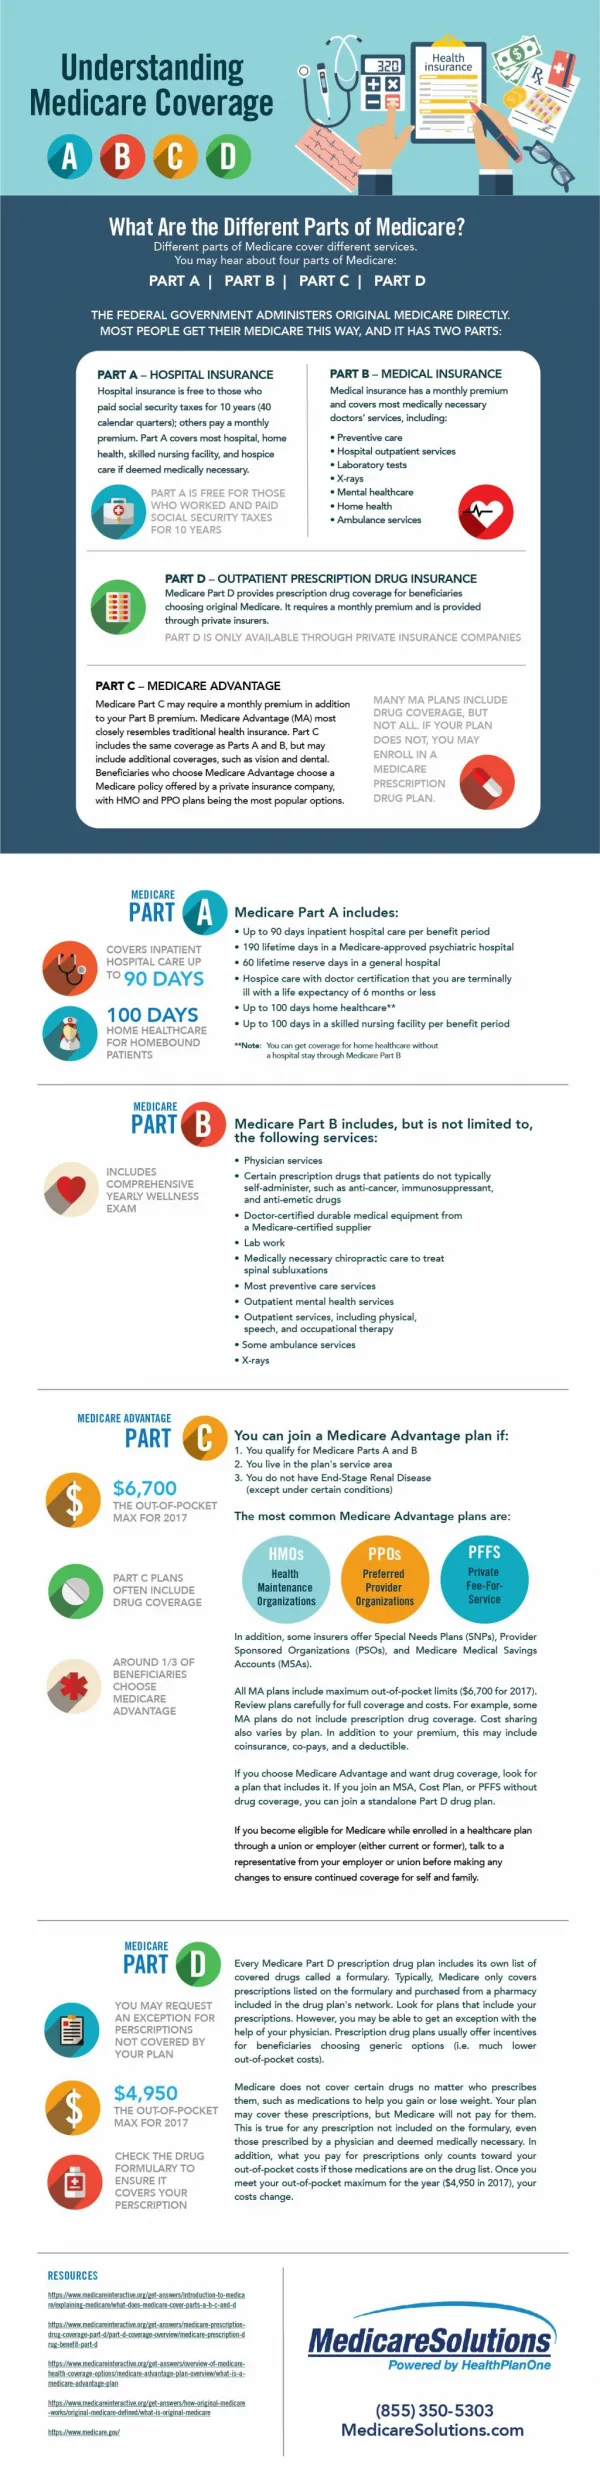 Visual Guide to Understanding Medicare